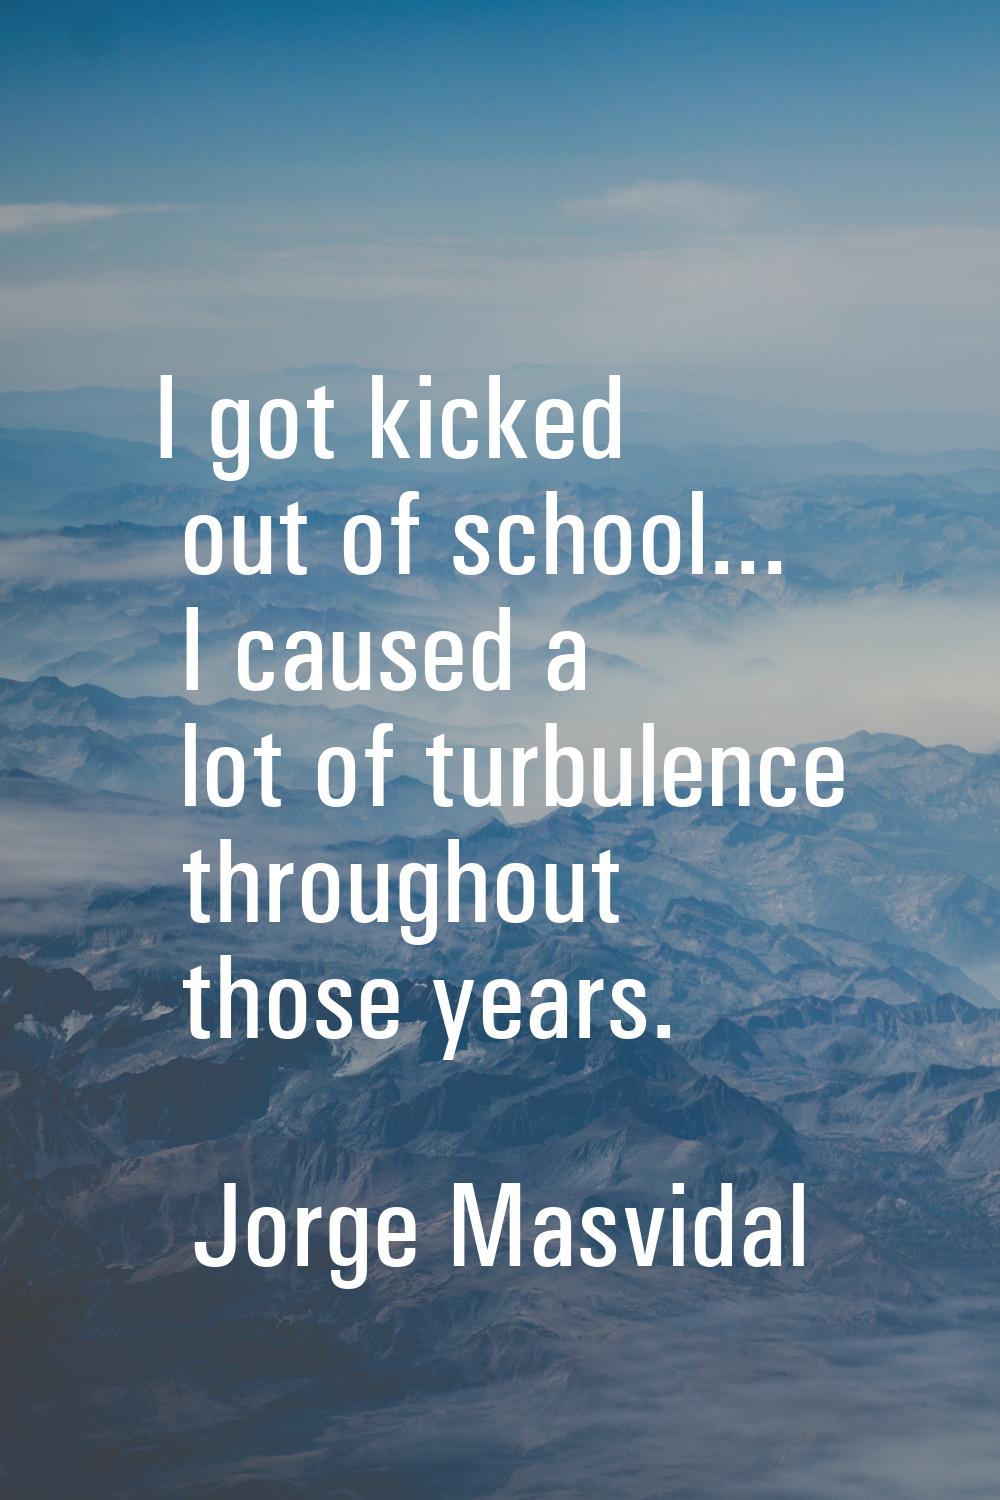 I got kicked out of school... I caused a lot of turbulence throughout those years.